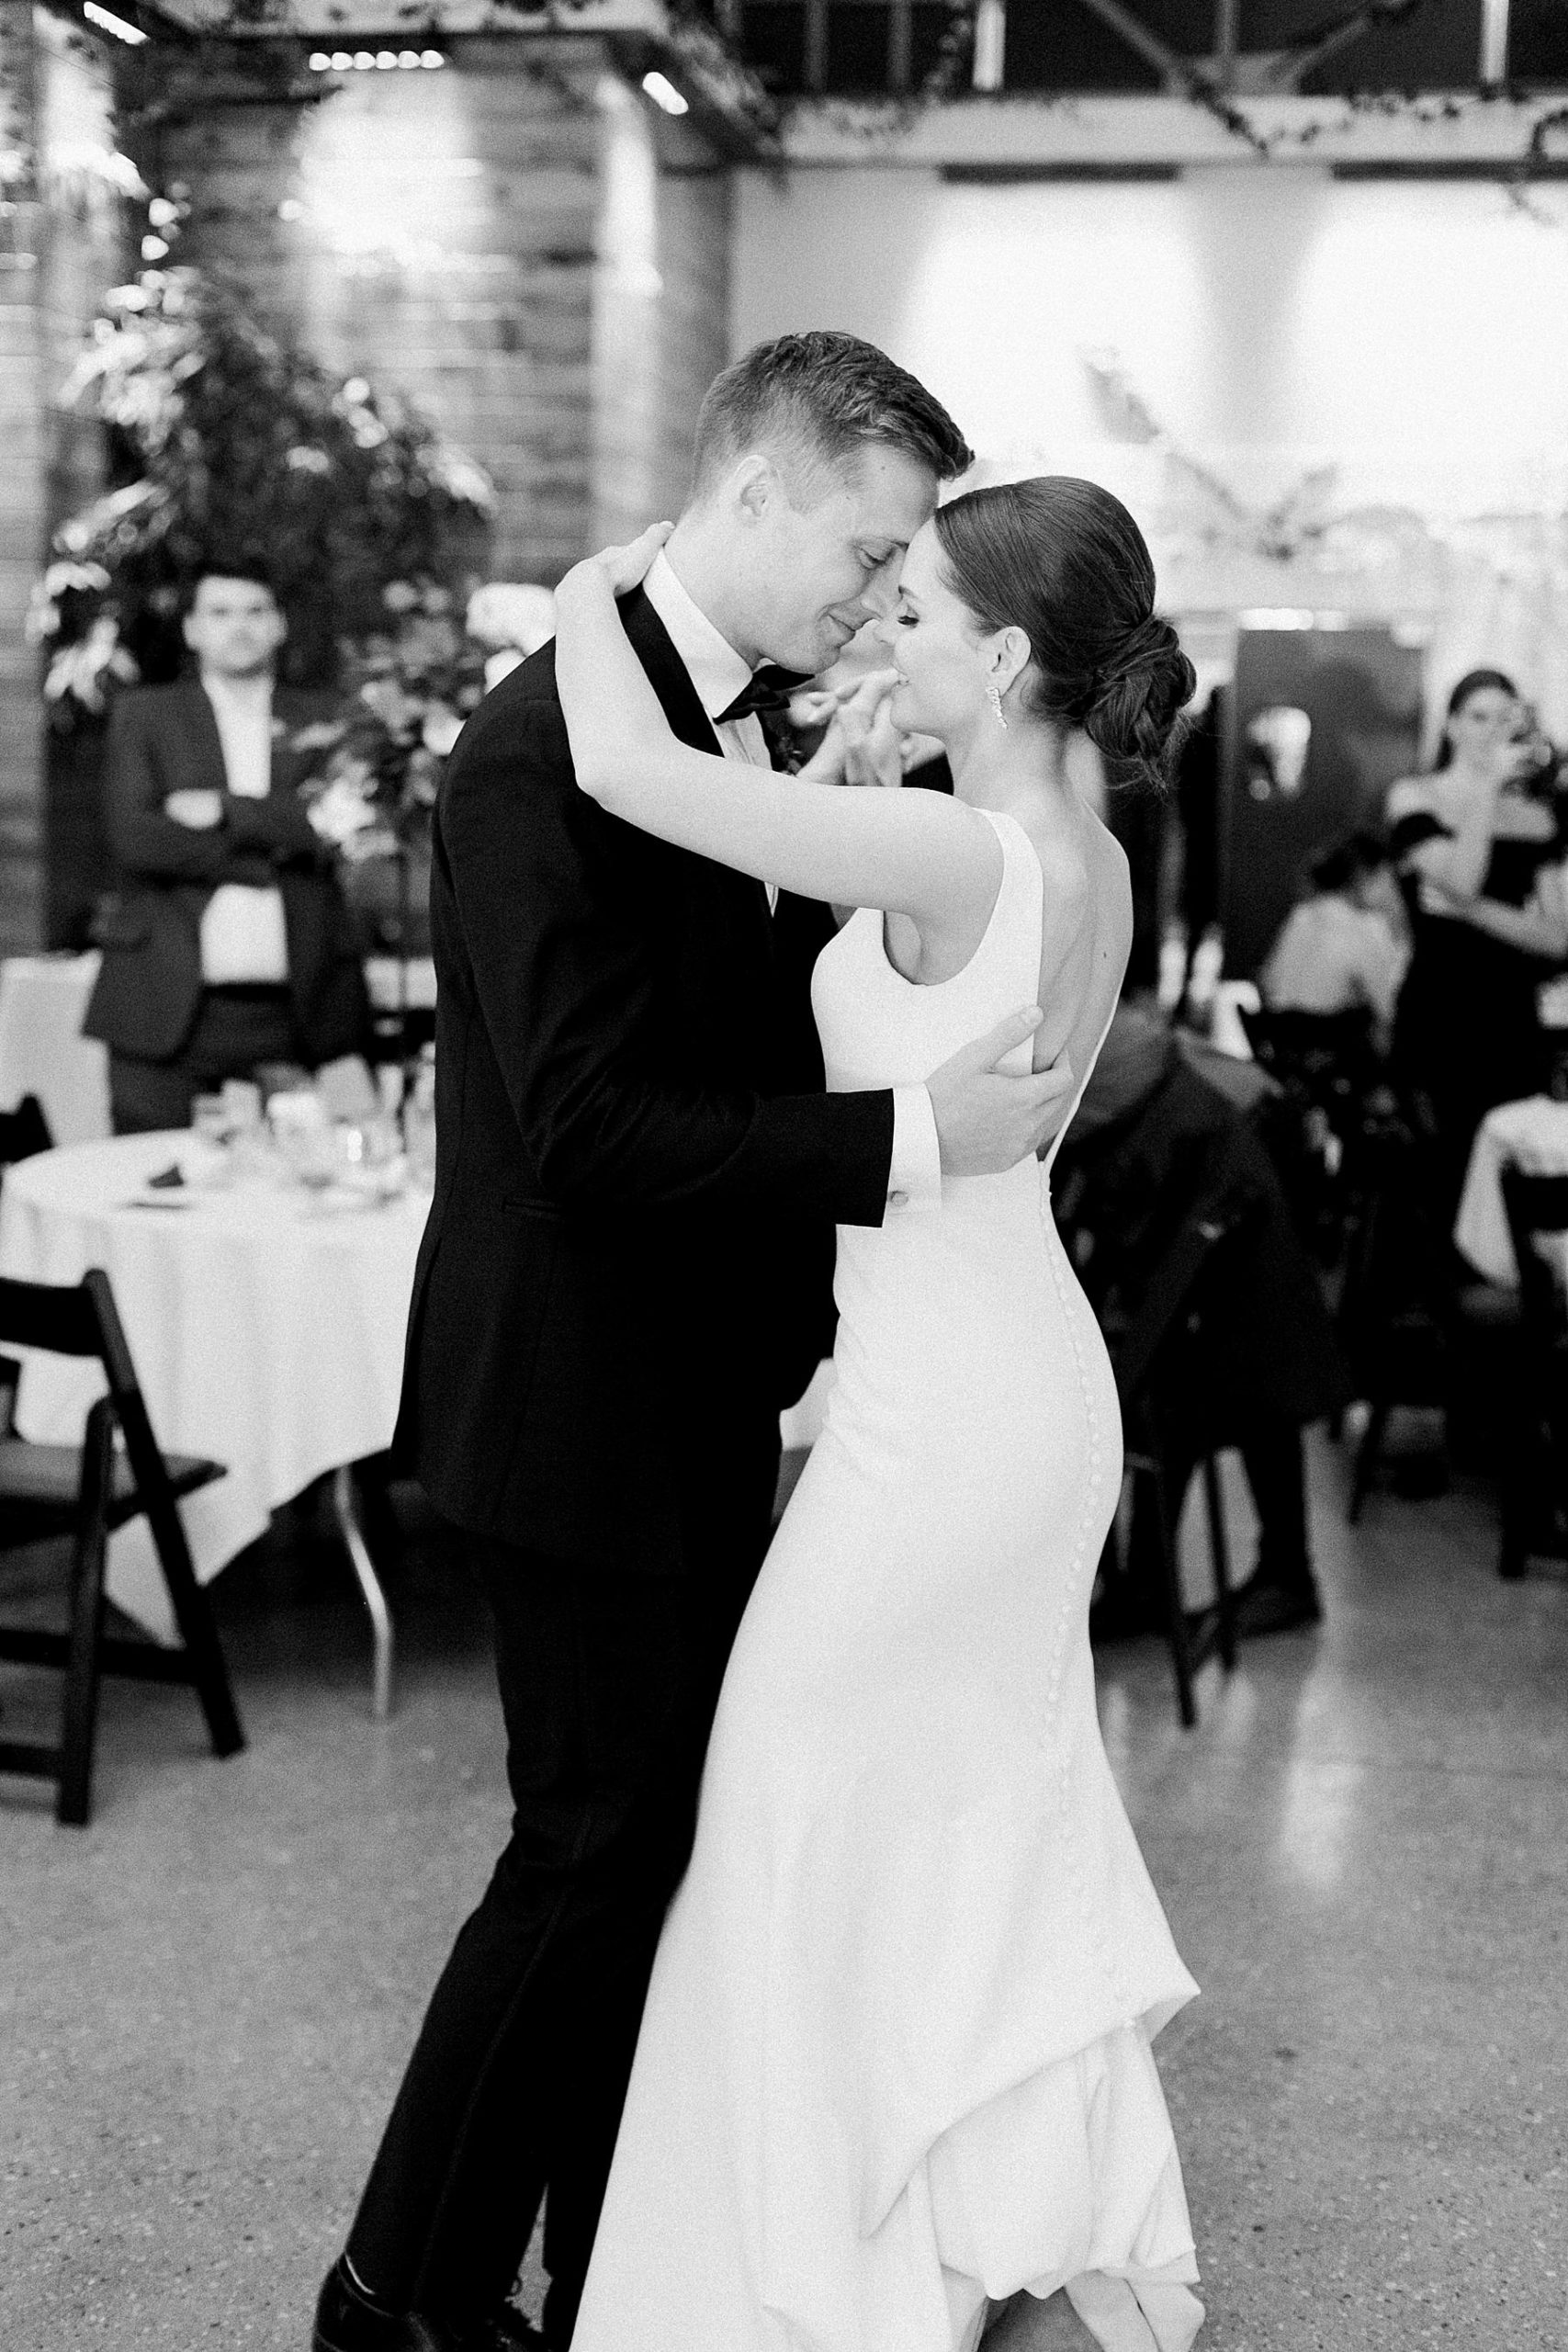 bride and groom first dance at wedding reception at ivy house, milwaukee, wisconsin